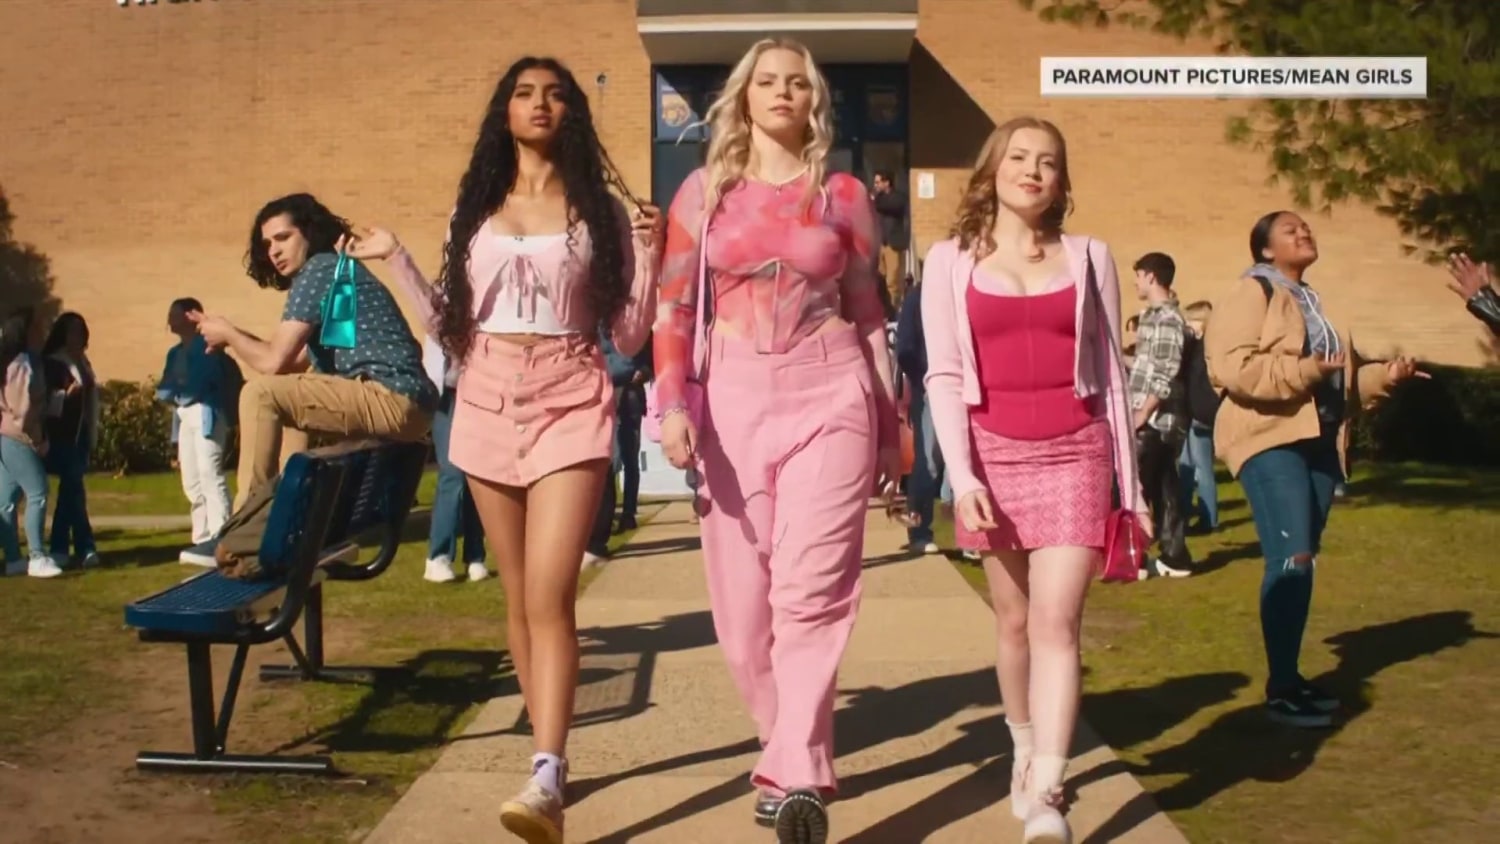 Mean Girls' Musical Triumphs at Box Office - The New York Times